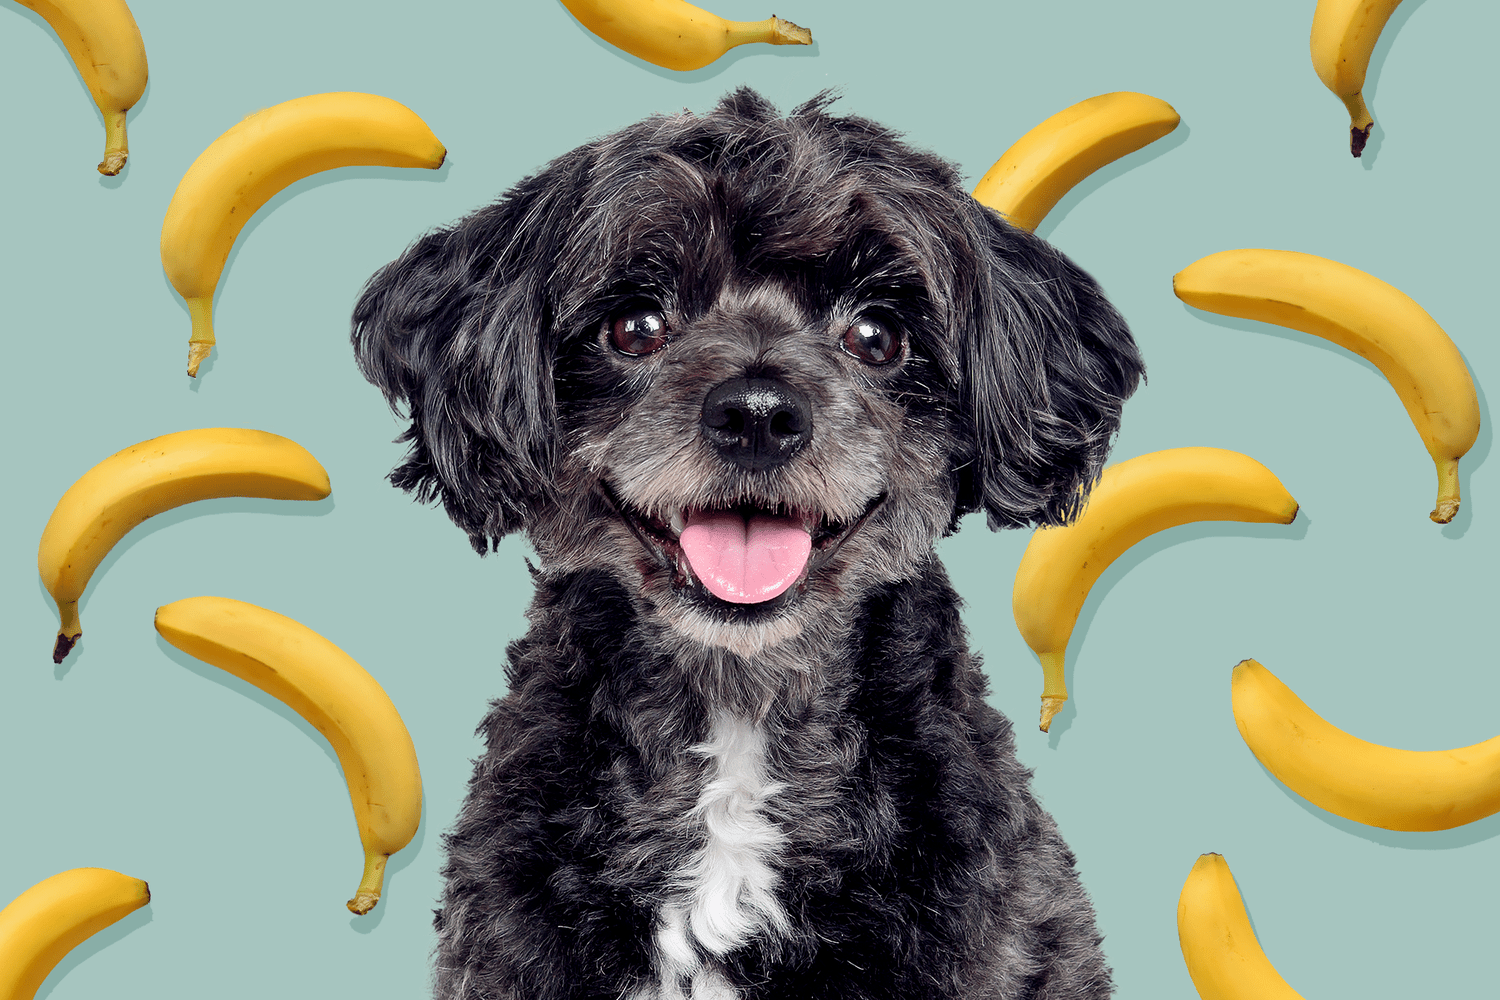 dog with a background of banana pattern; can dogs eat bananas?